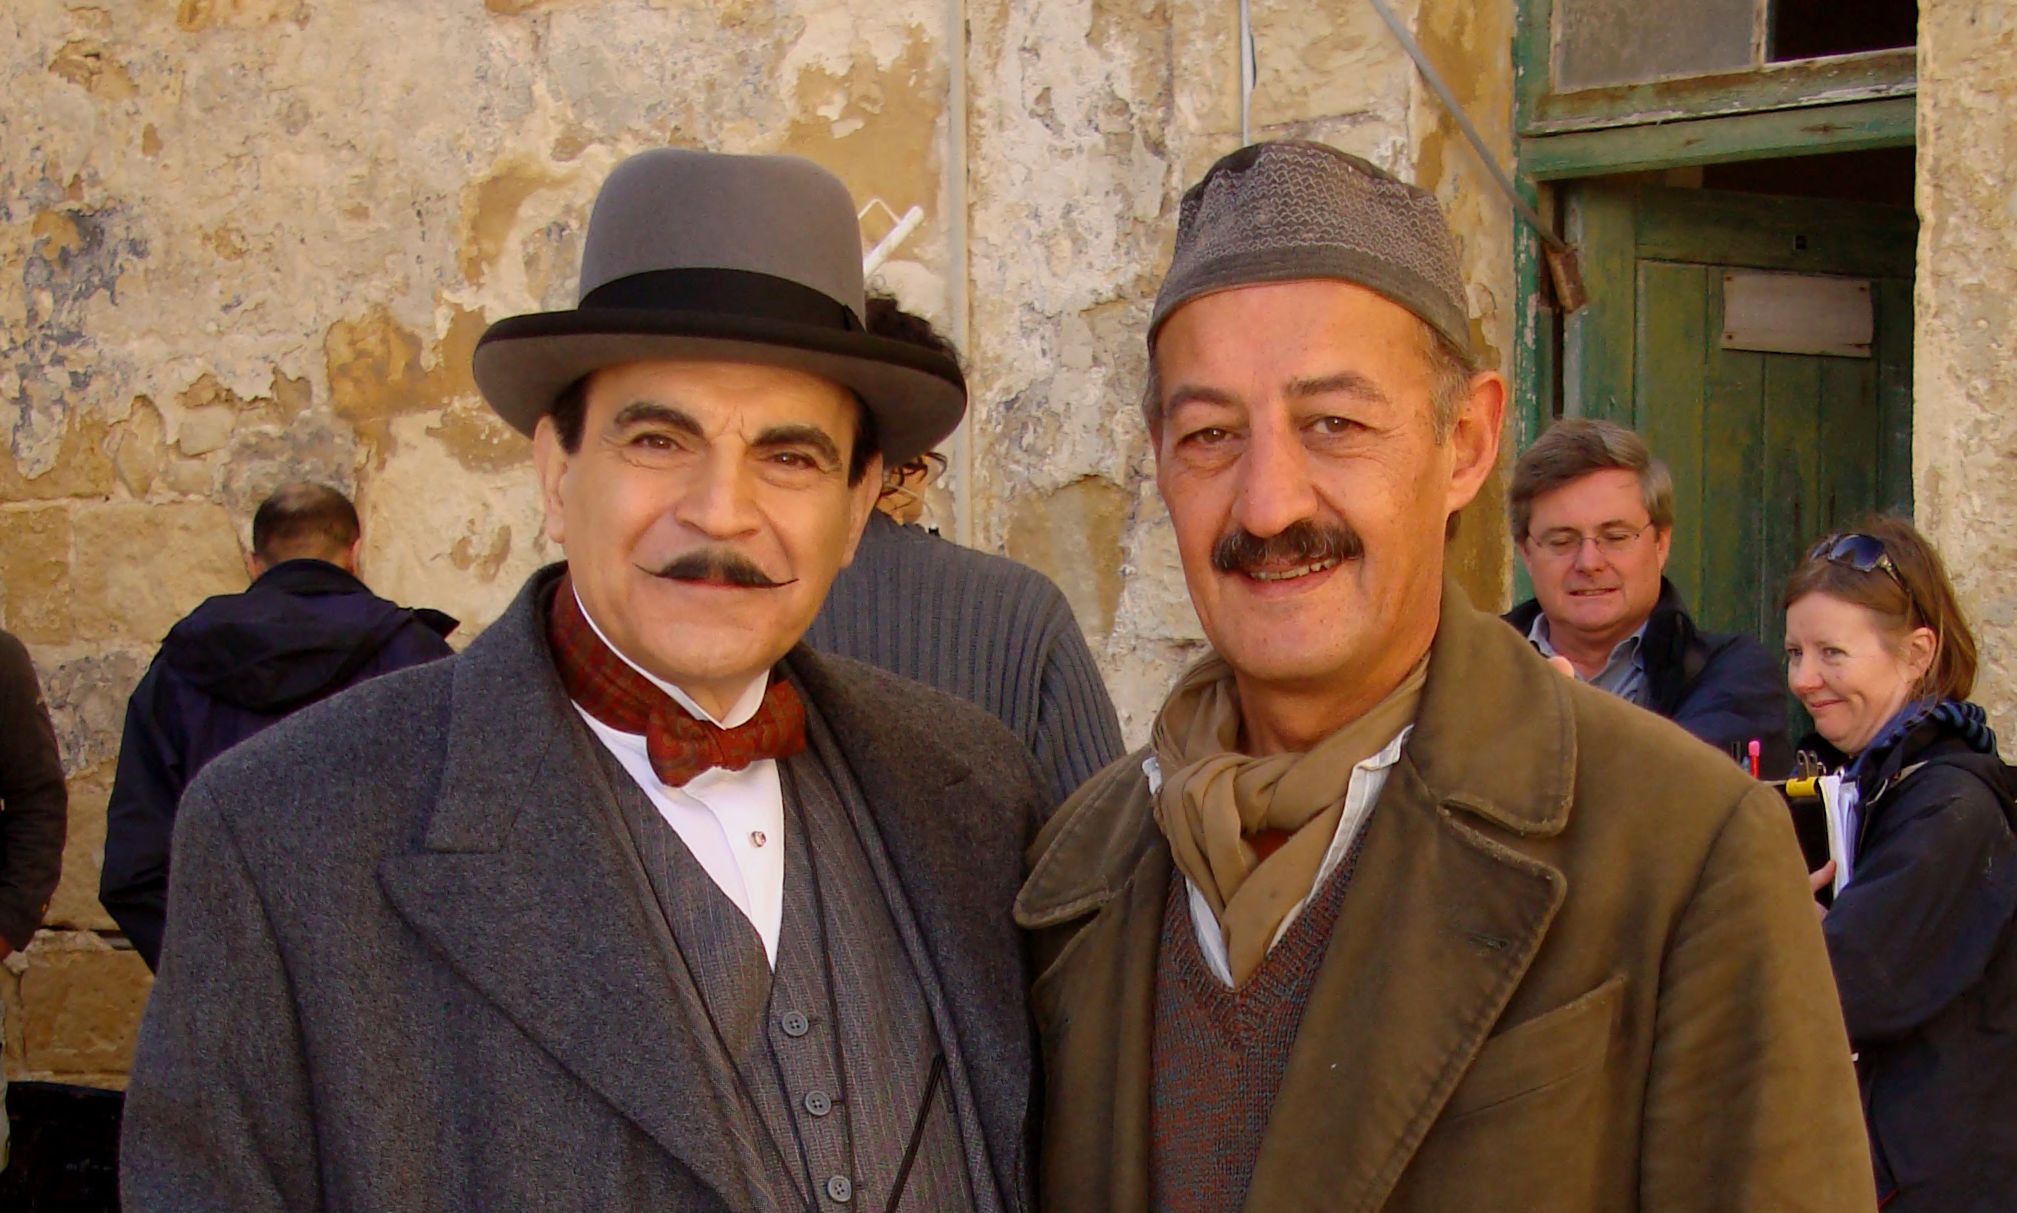 With David Suchet in Murder On The Orient Express